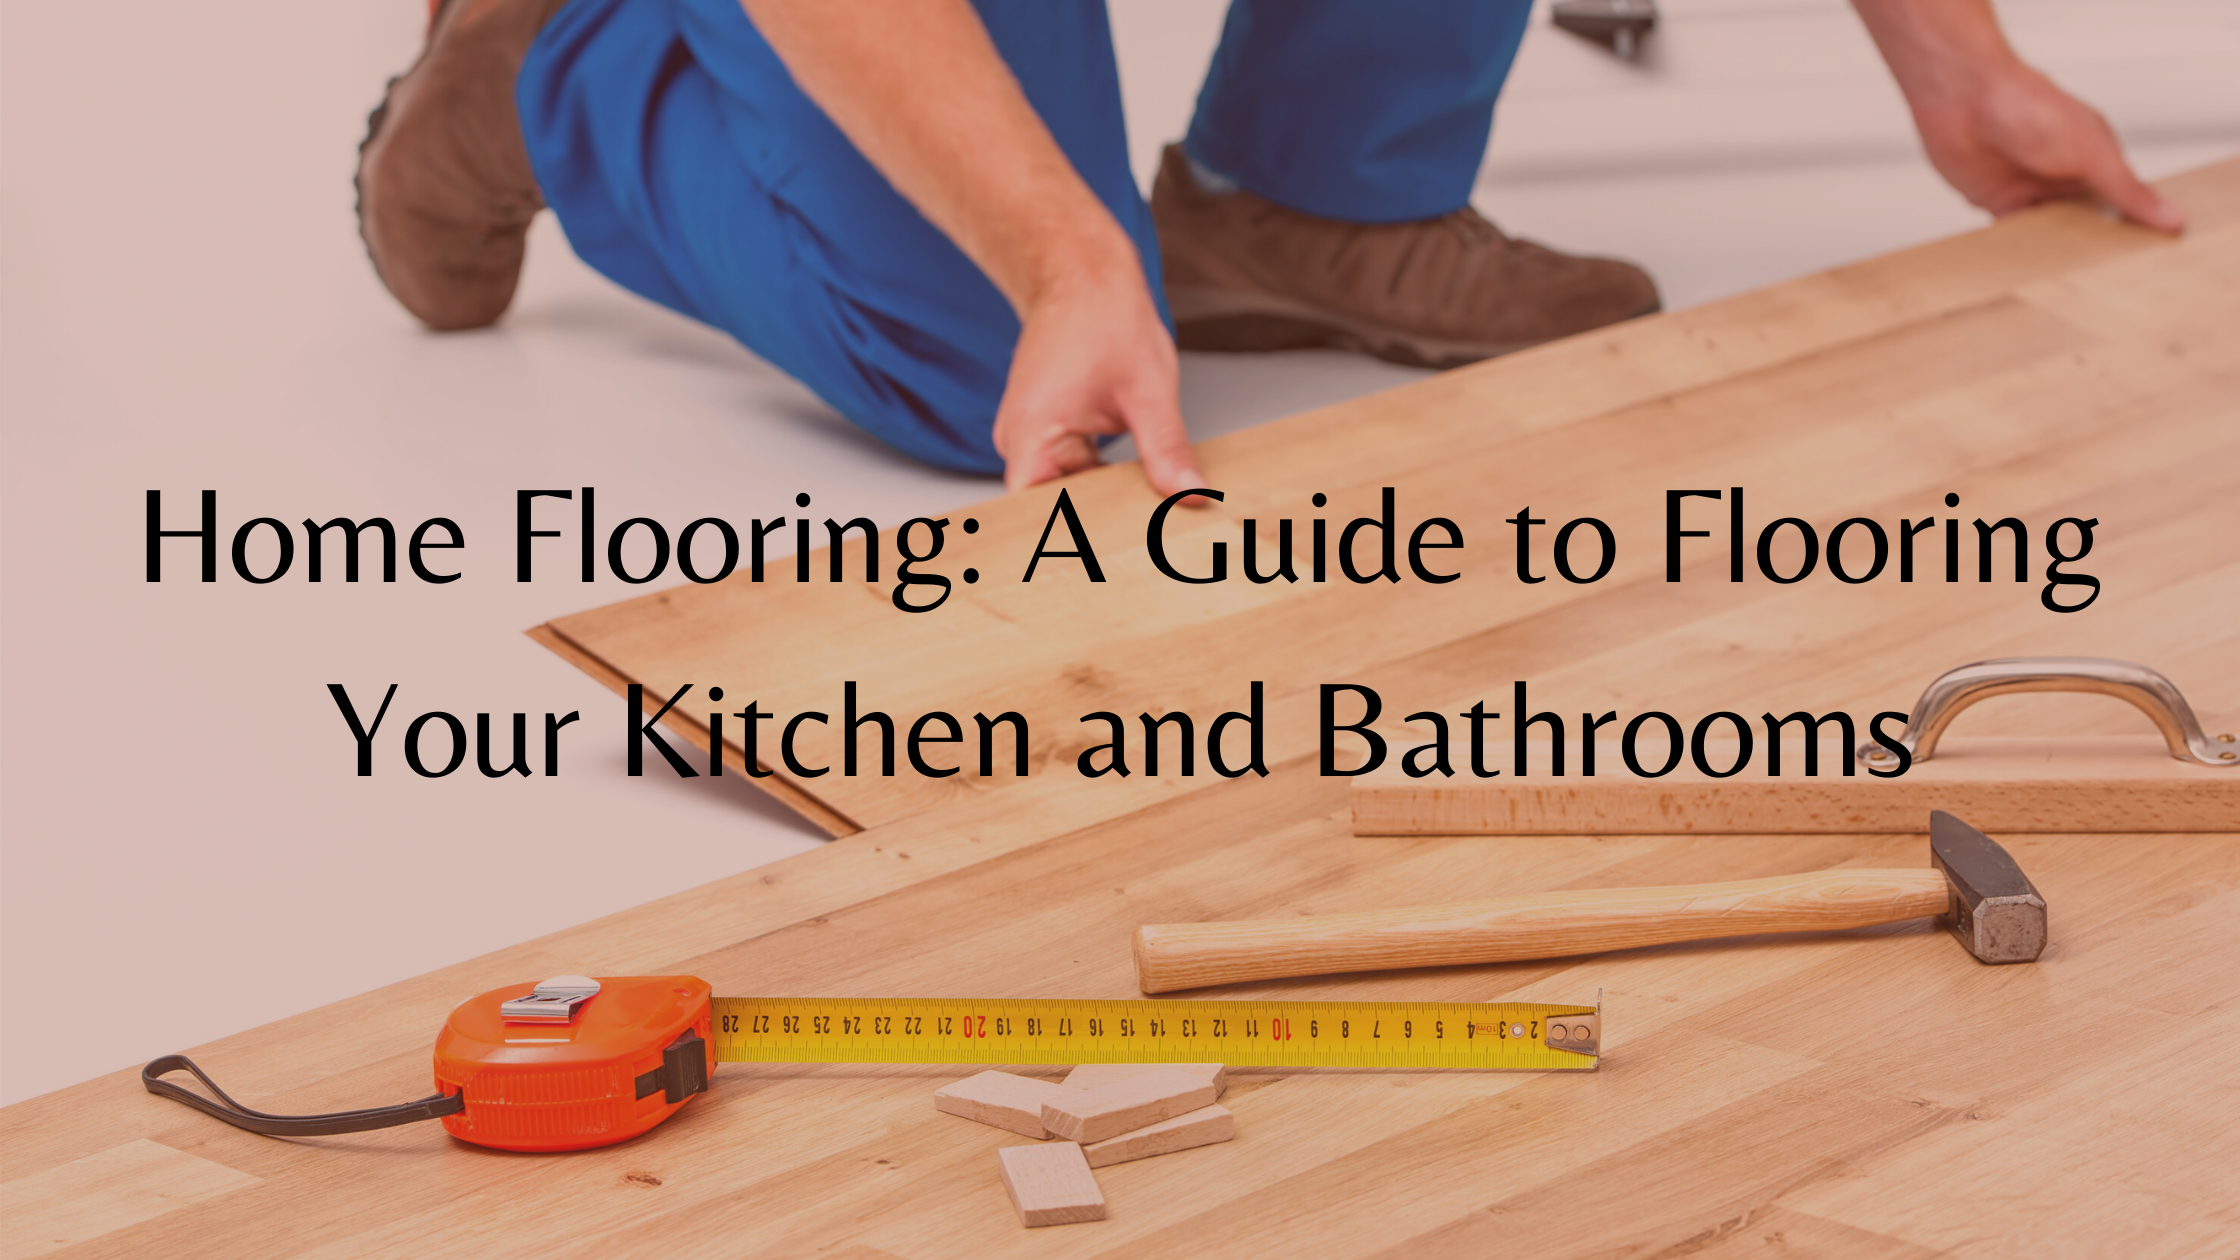 https://handymanconnection.com/wp-content/uploads/2021/05/A-Guide-to-Flooring-Your-Kitchen-and-Bathrooms-for-Home-Flooring.png